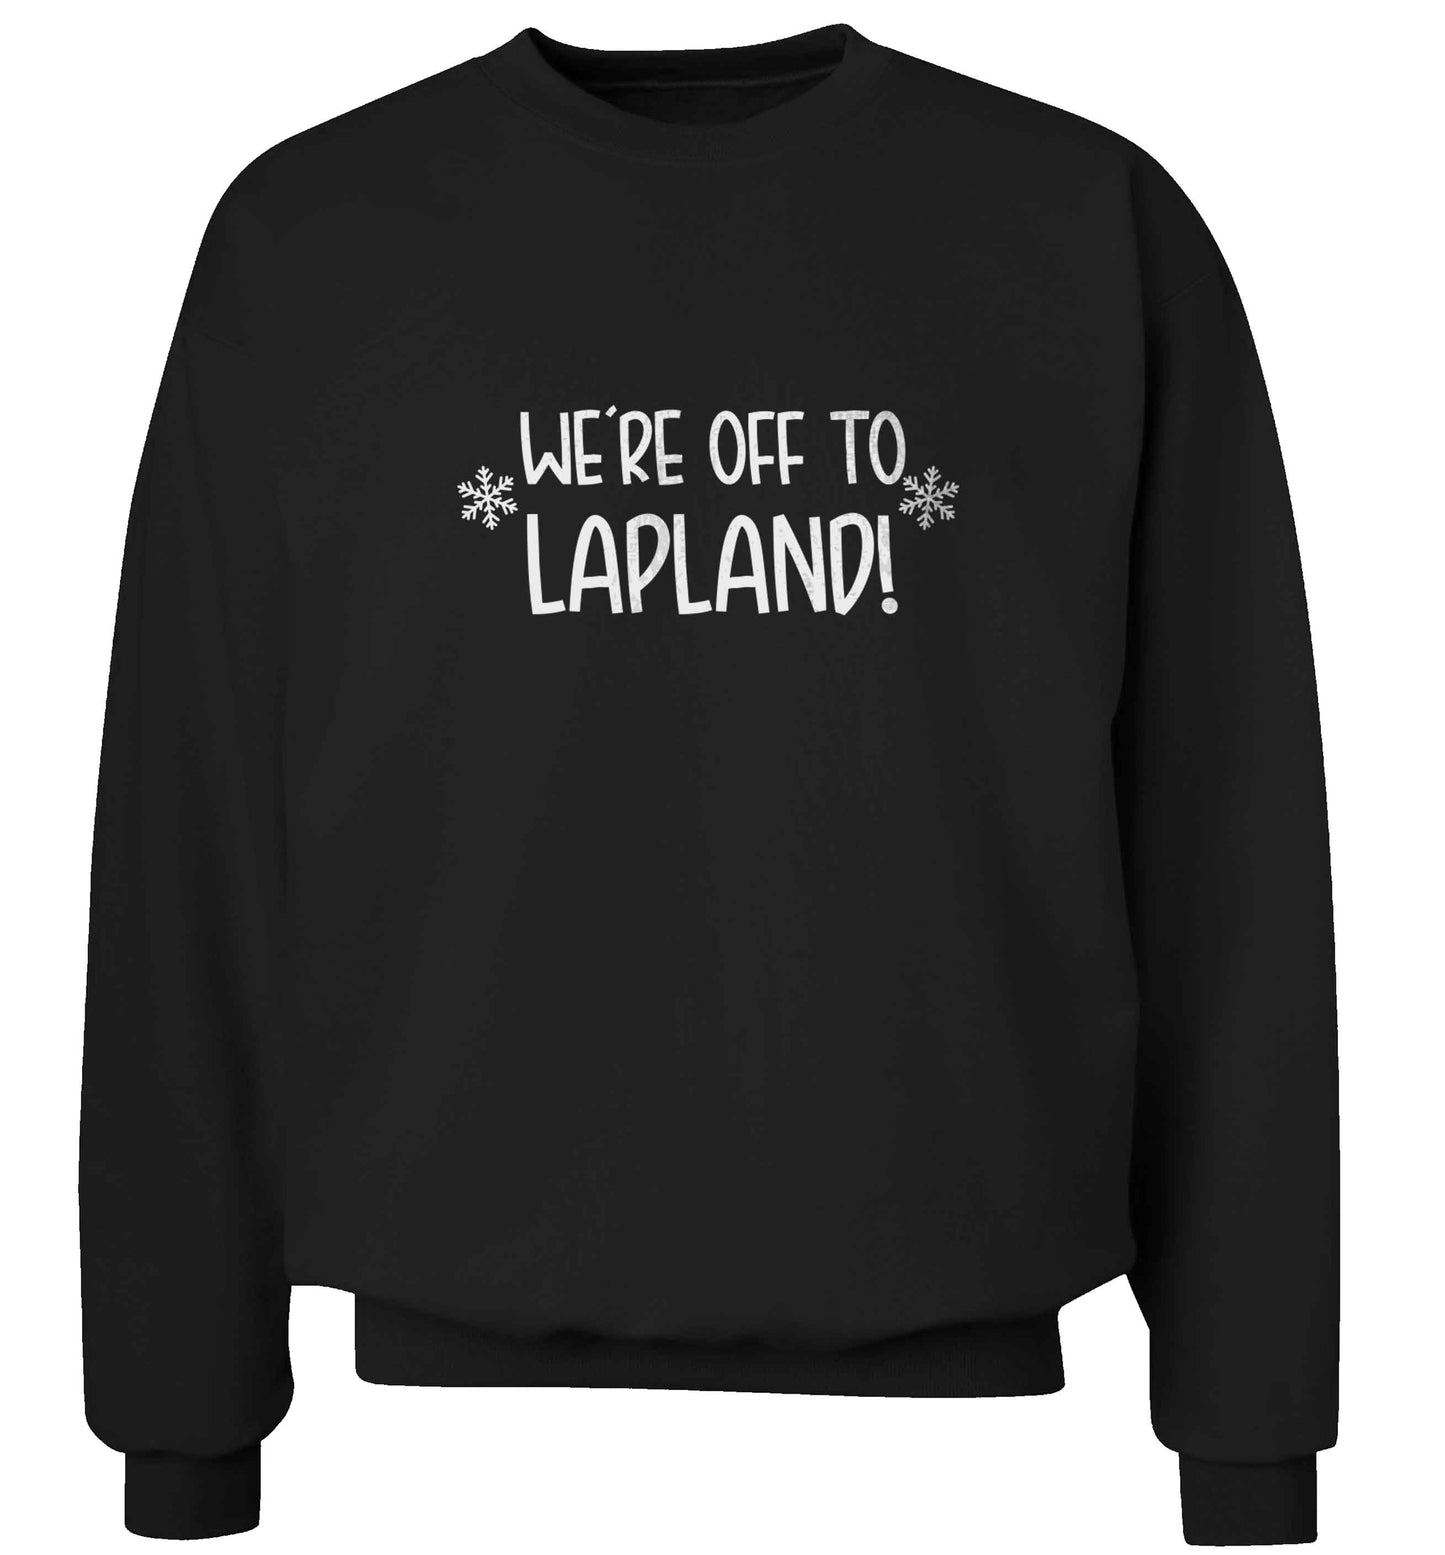 We're off to Lapland adult's unisex black sweater 2XL